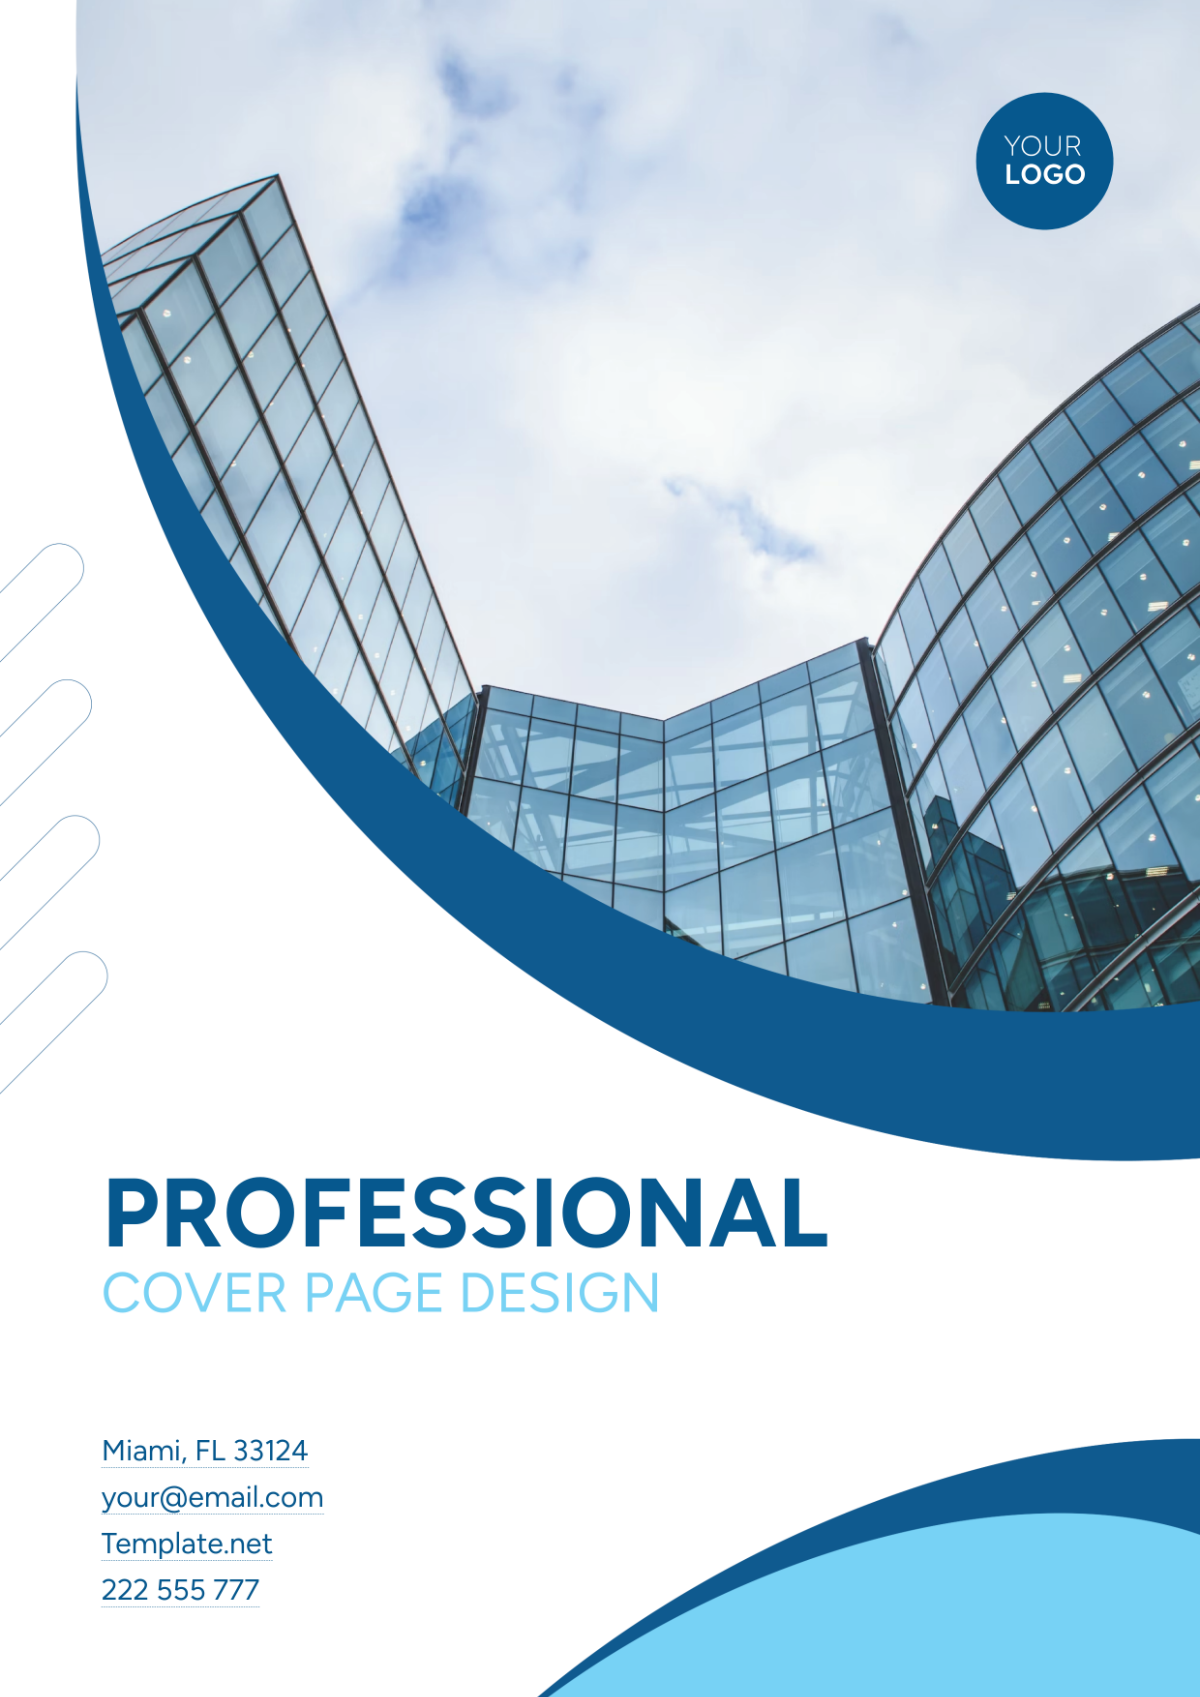 FREE Cover Page Design Templates - Edit Online & Download | Template.net